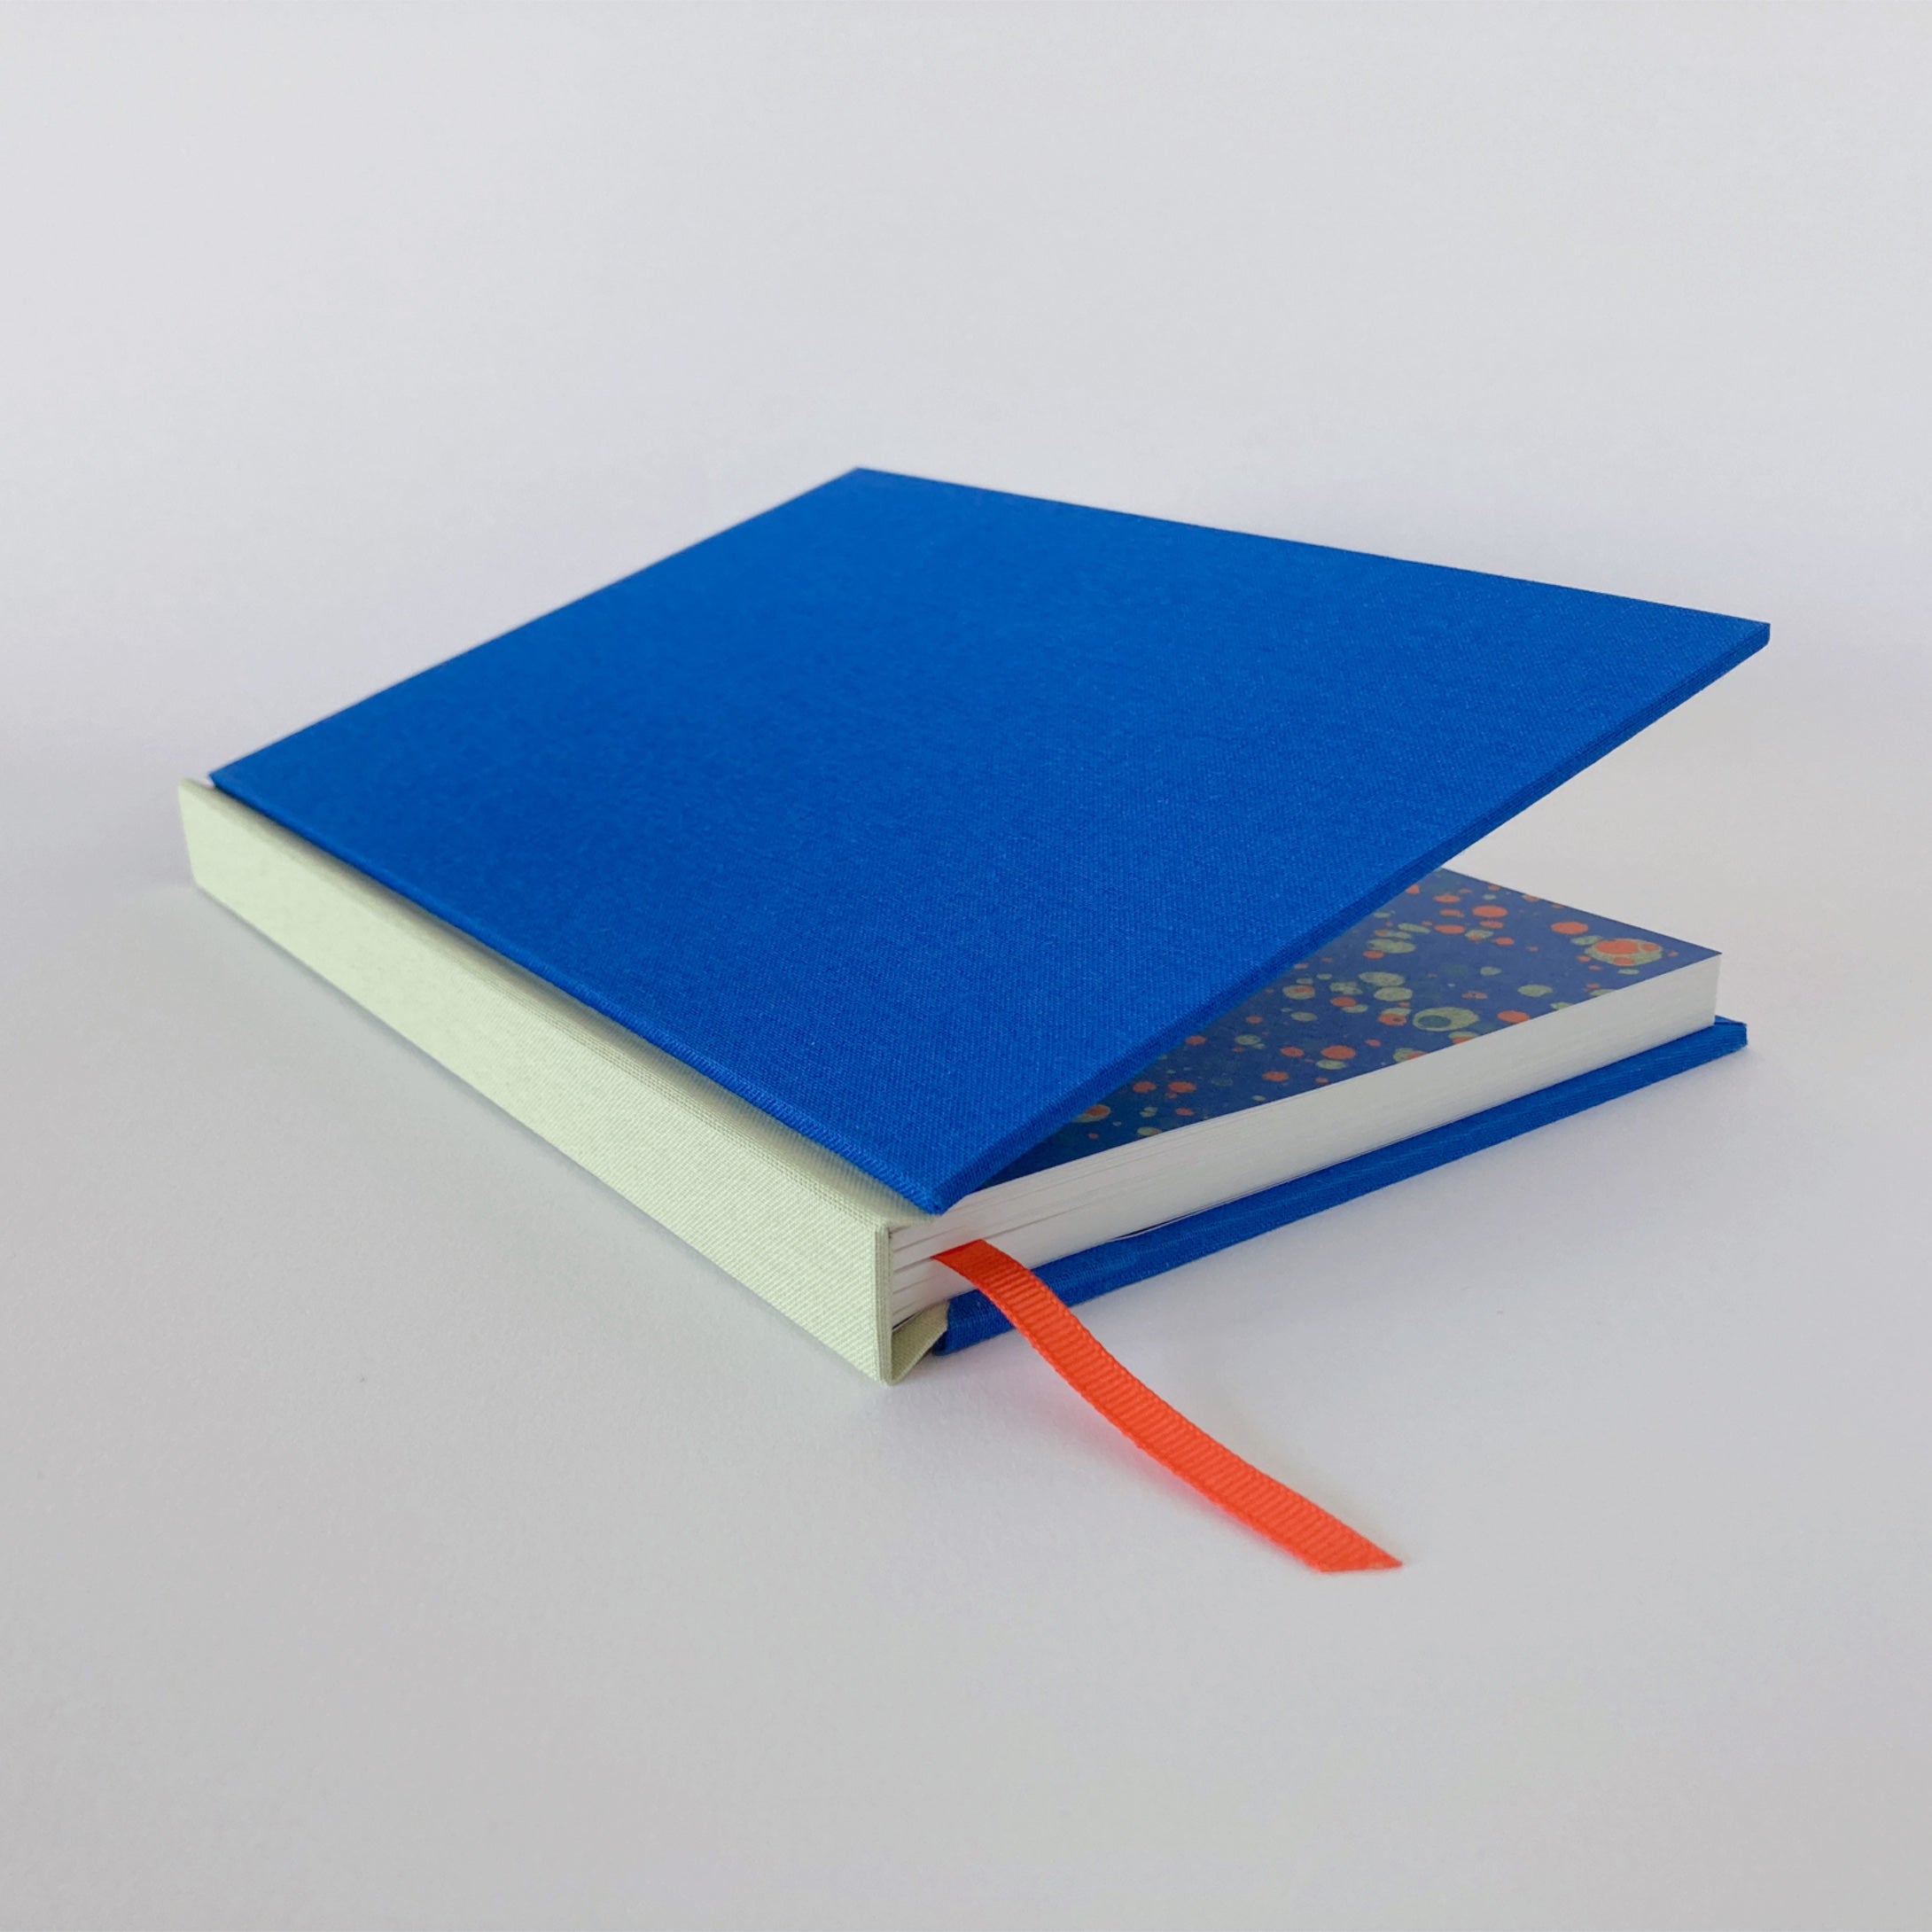 Blue and mint hardback sketchbook partially open, revealing marble endpapers.